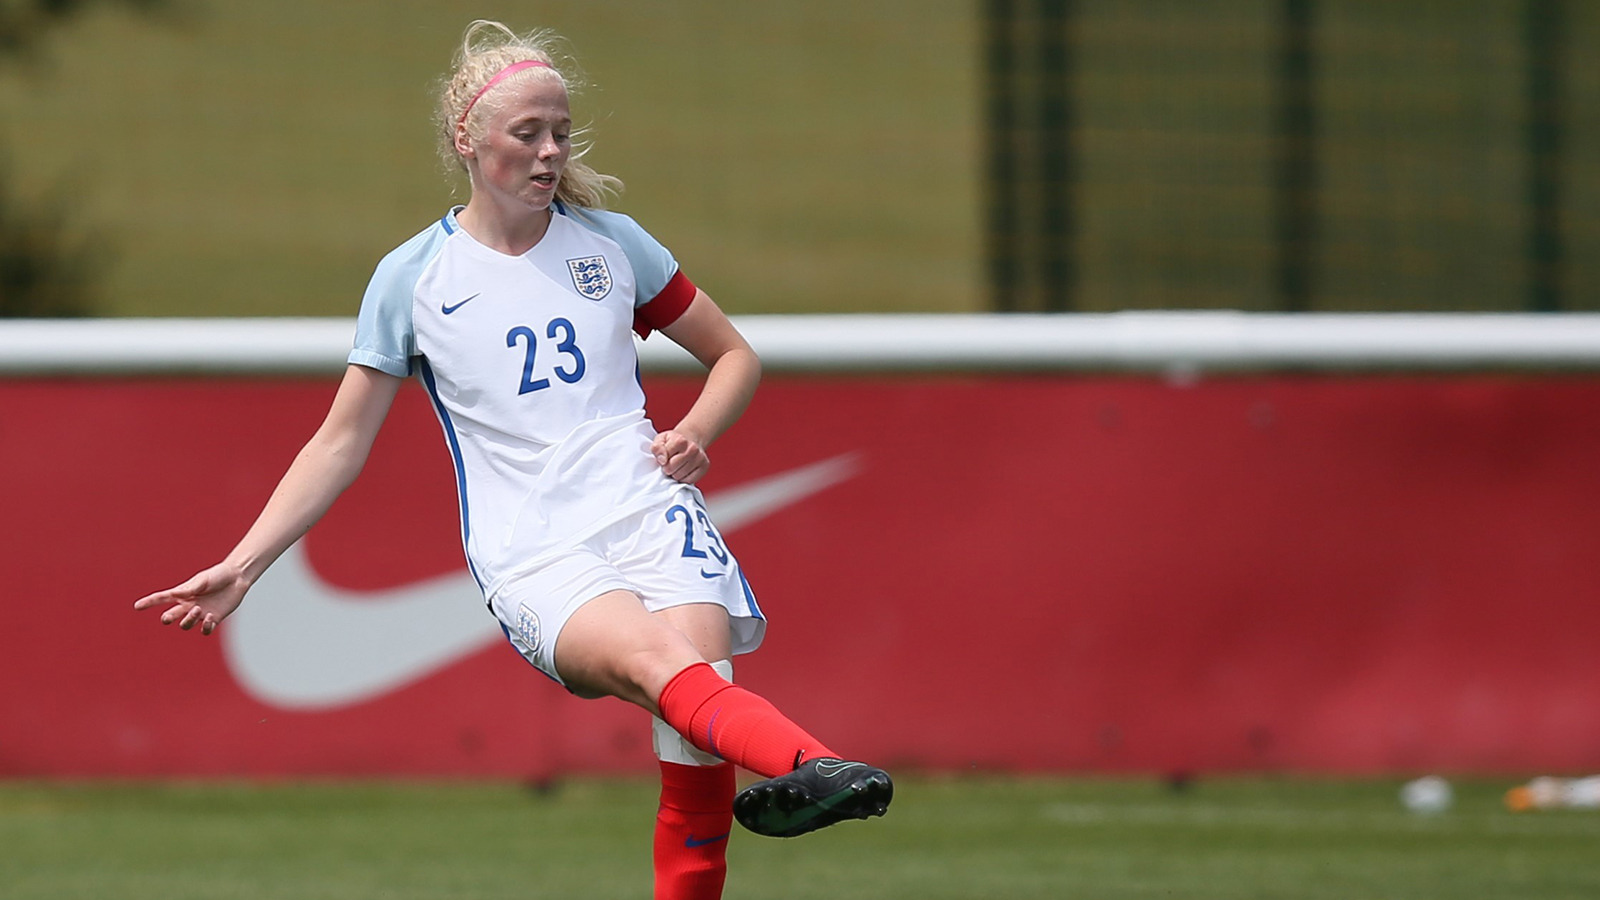 Fisk Tabbed Finalist For England Women's Young Player of the Year Award